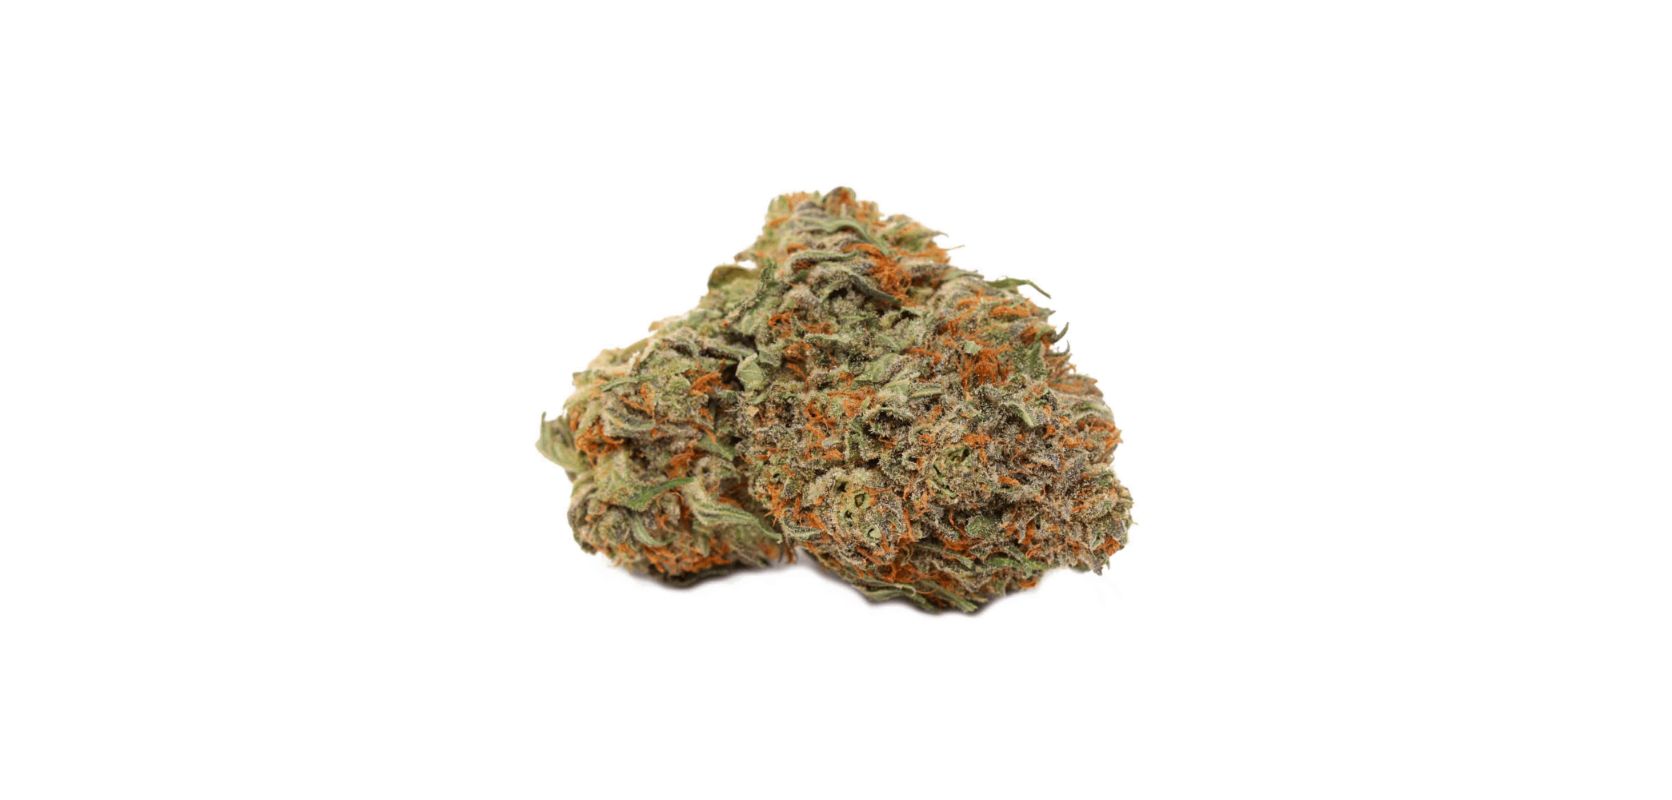 Cali Bubba is famous for its sedative and relaxing effects - not only that, but it also has an impressive terpene profile.